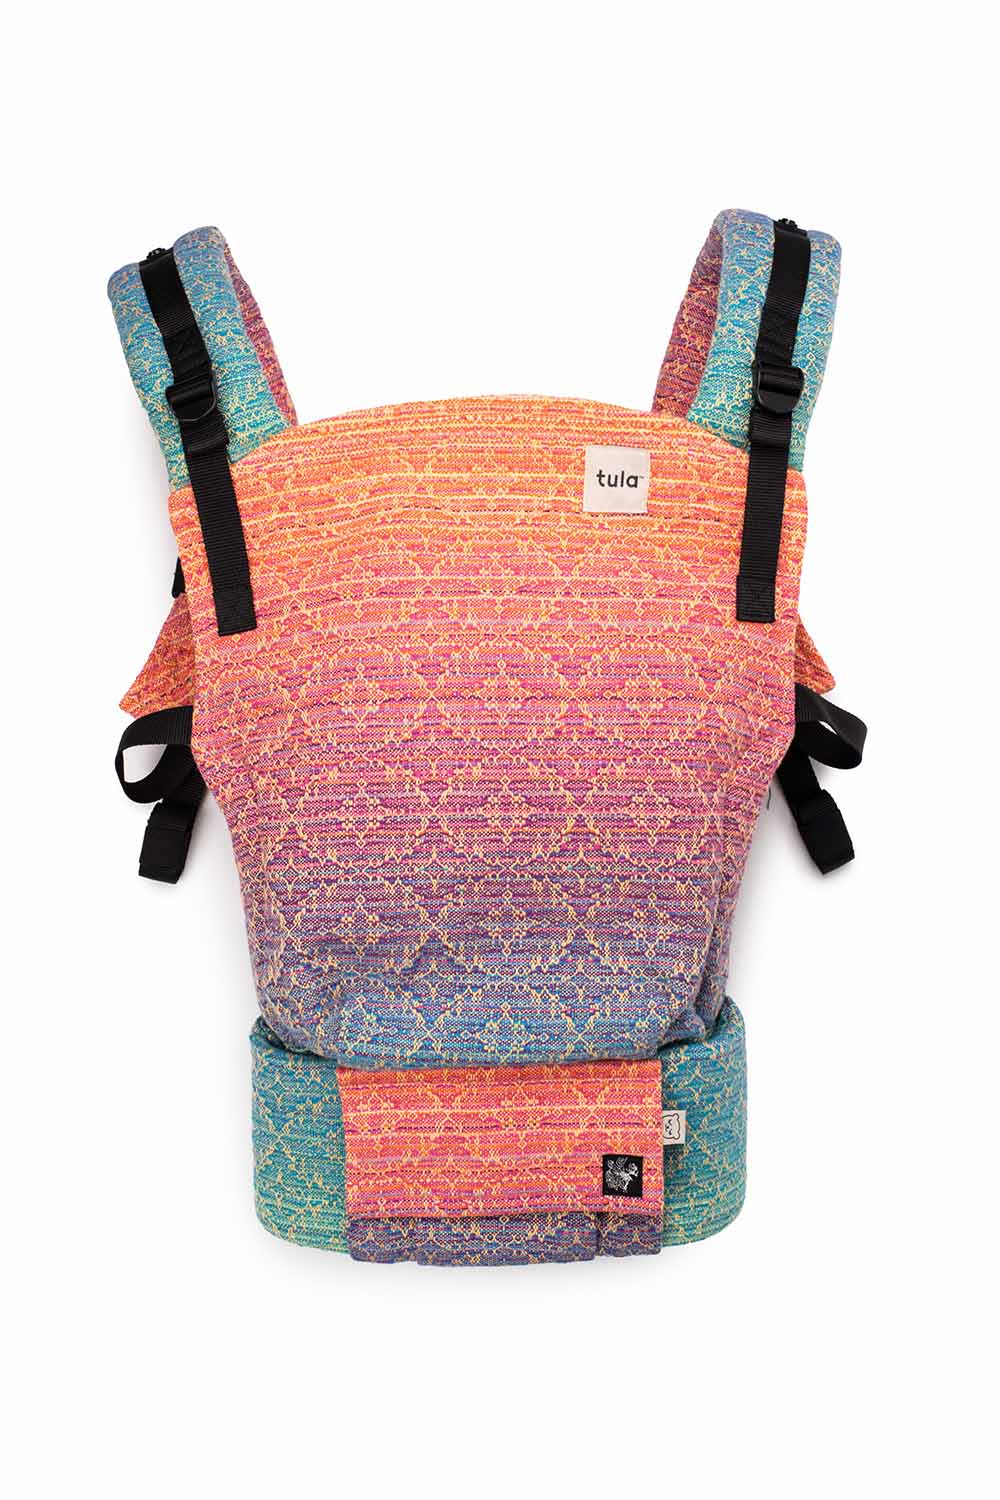 Sugar Reef - Signature Woven Free-to-Grow Baby Carrier